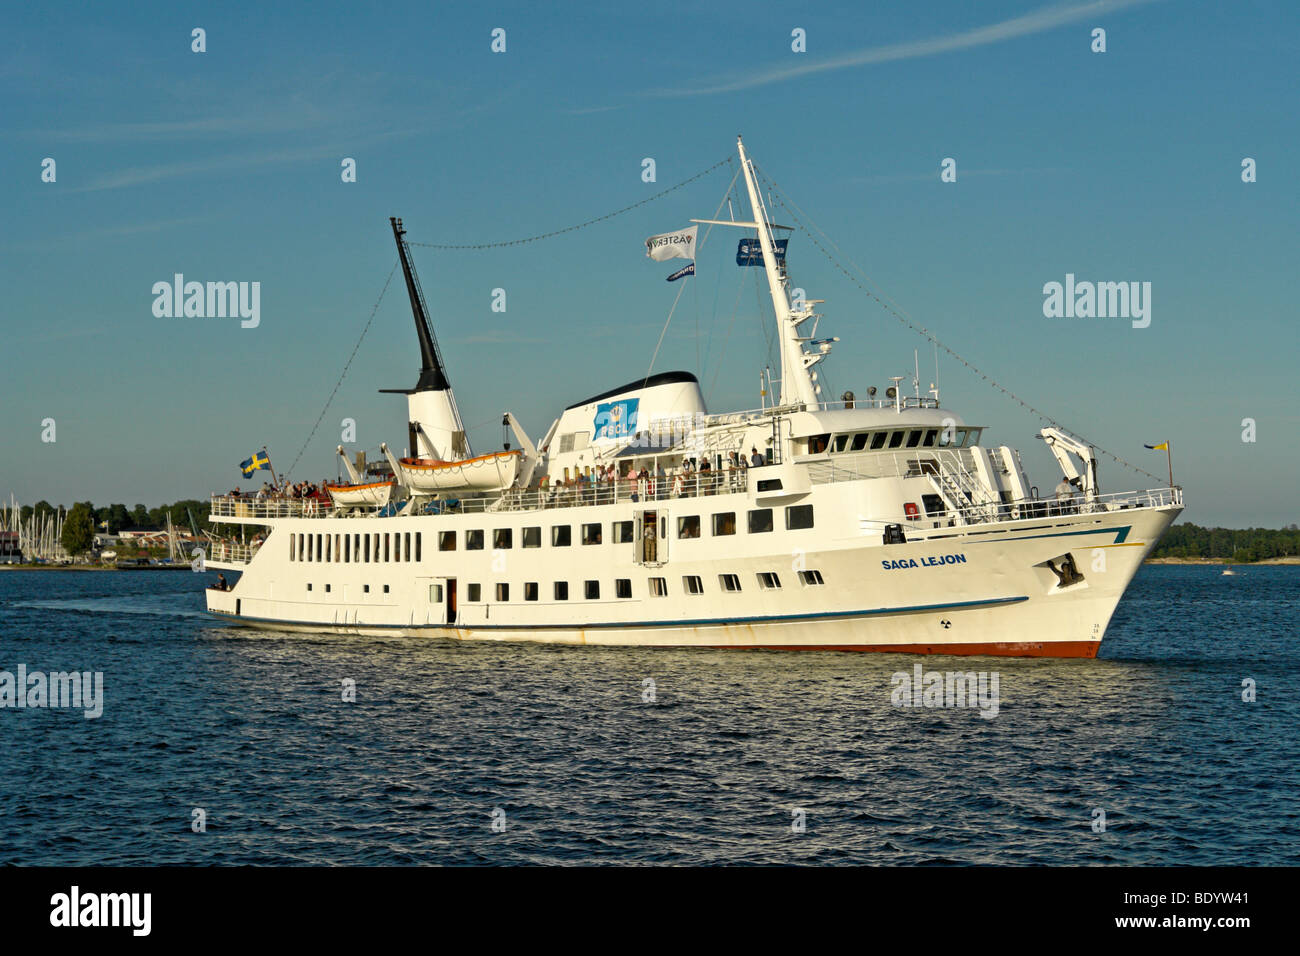 The Swedish archipelago cruise ship Saga Lejon arrives at Vastervik at the end of a day cruise from Nykoping Stock Photo